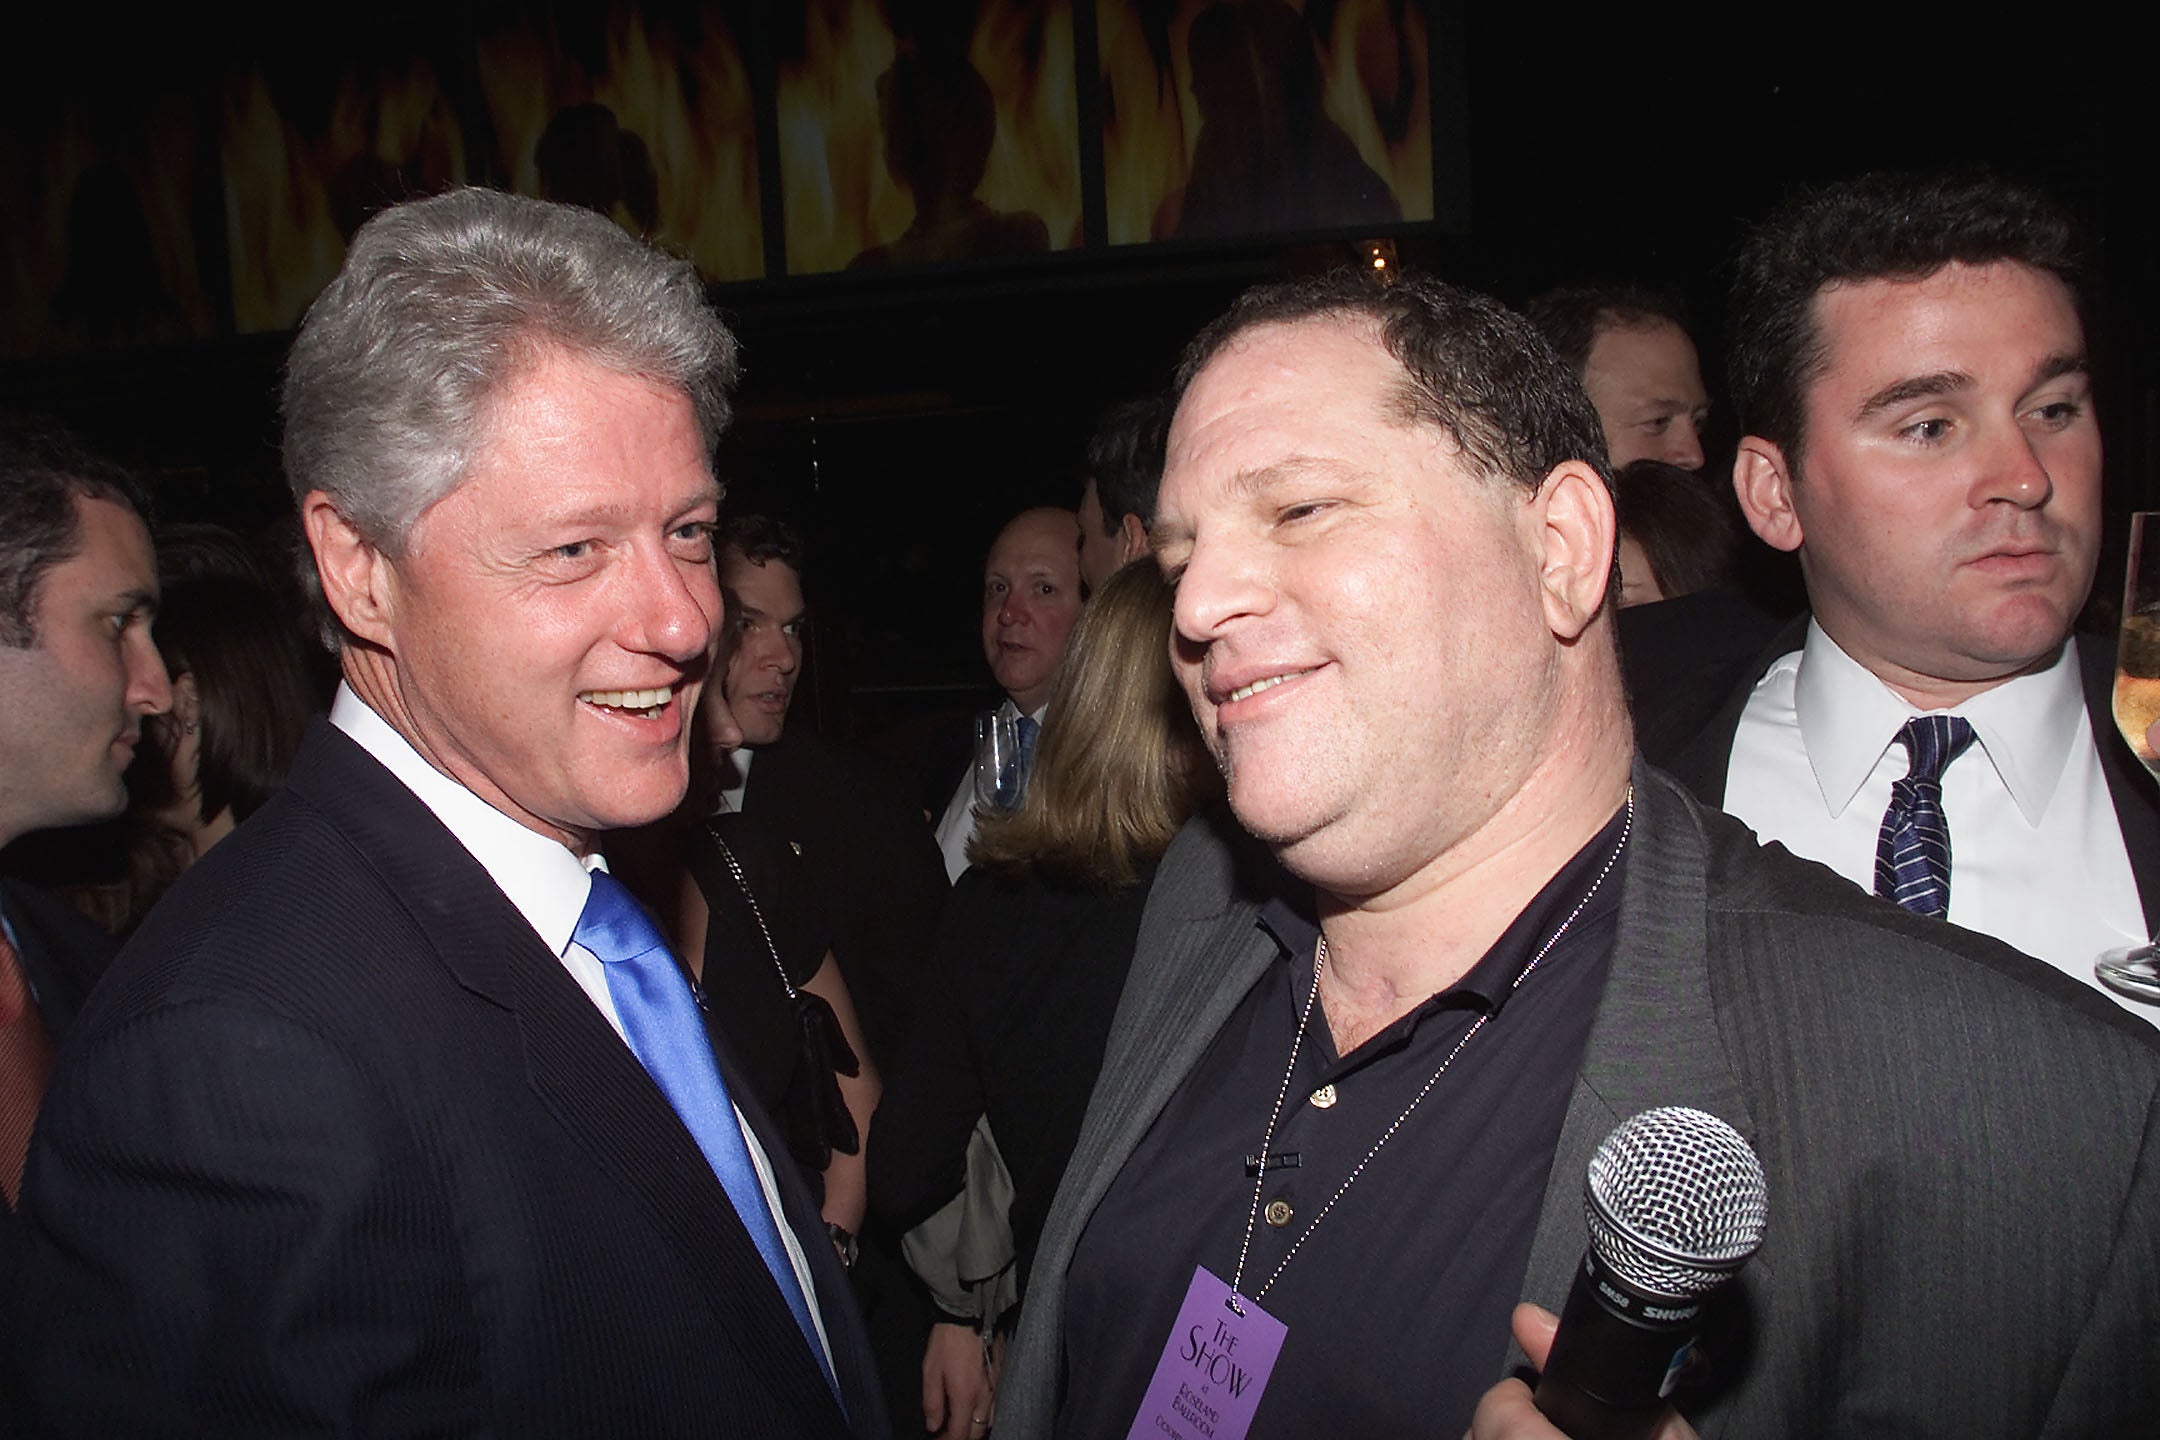 Weinstein, right, pictured with Bill Clinton in 2000, was once a powerful Hollywood producer